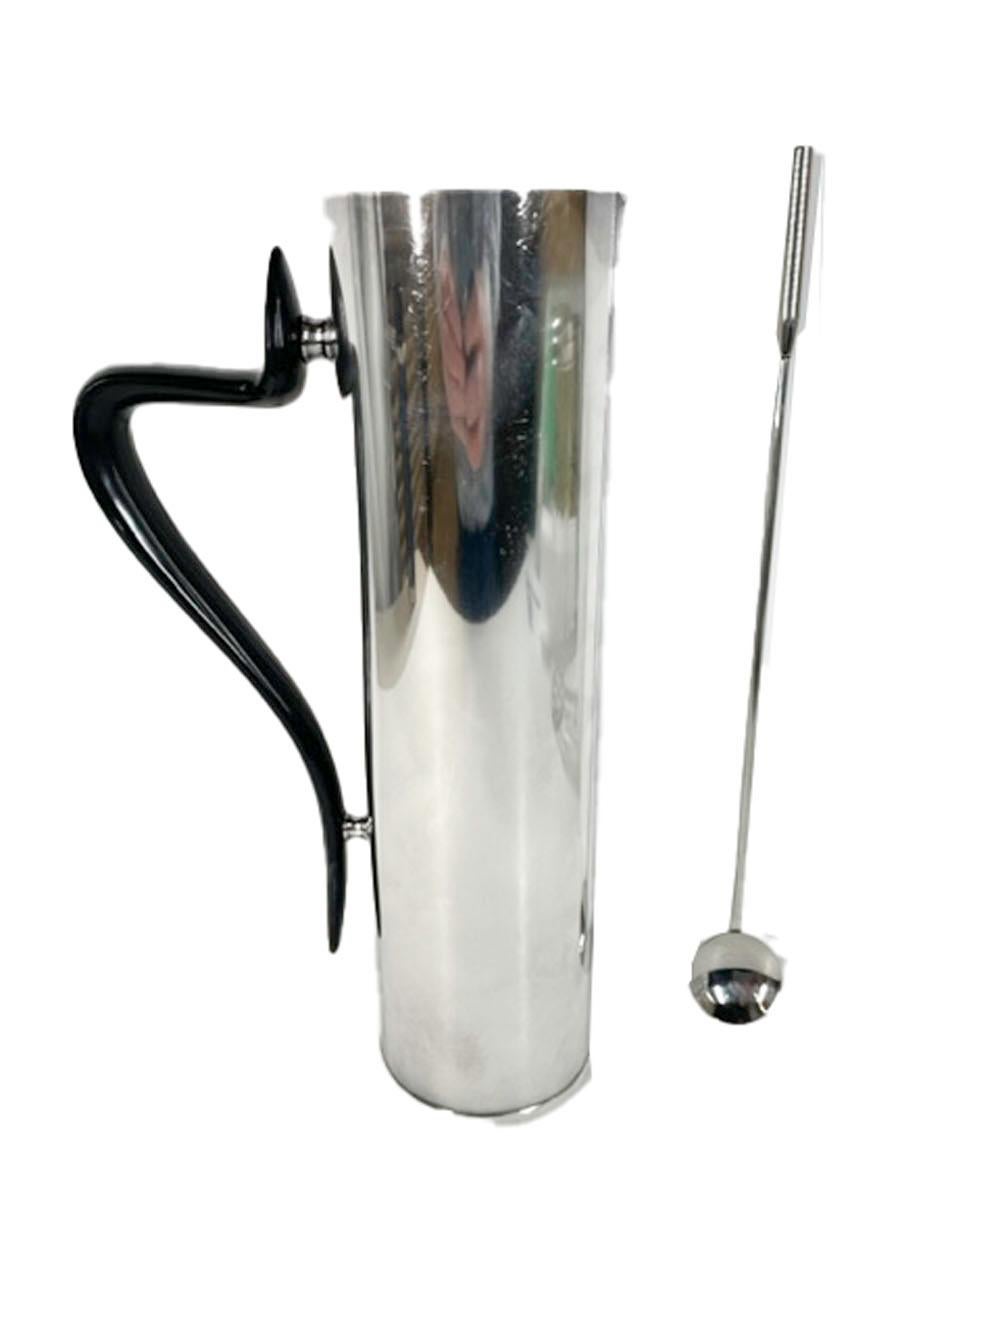 Silver plate cocktail pitcher (with associated stir spoon) designed in 1959 by Donald H. Colflesh for Gorham. This design was included in the 2006 Smithsonian Institute exhibit 